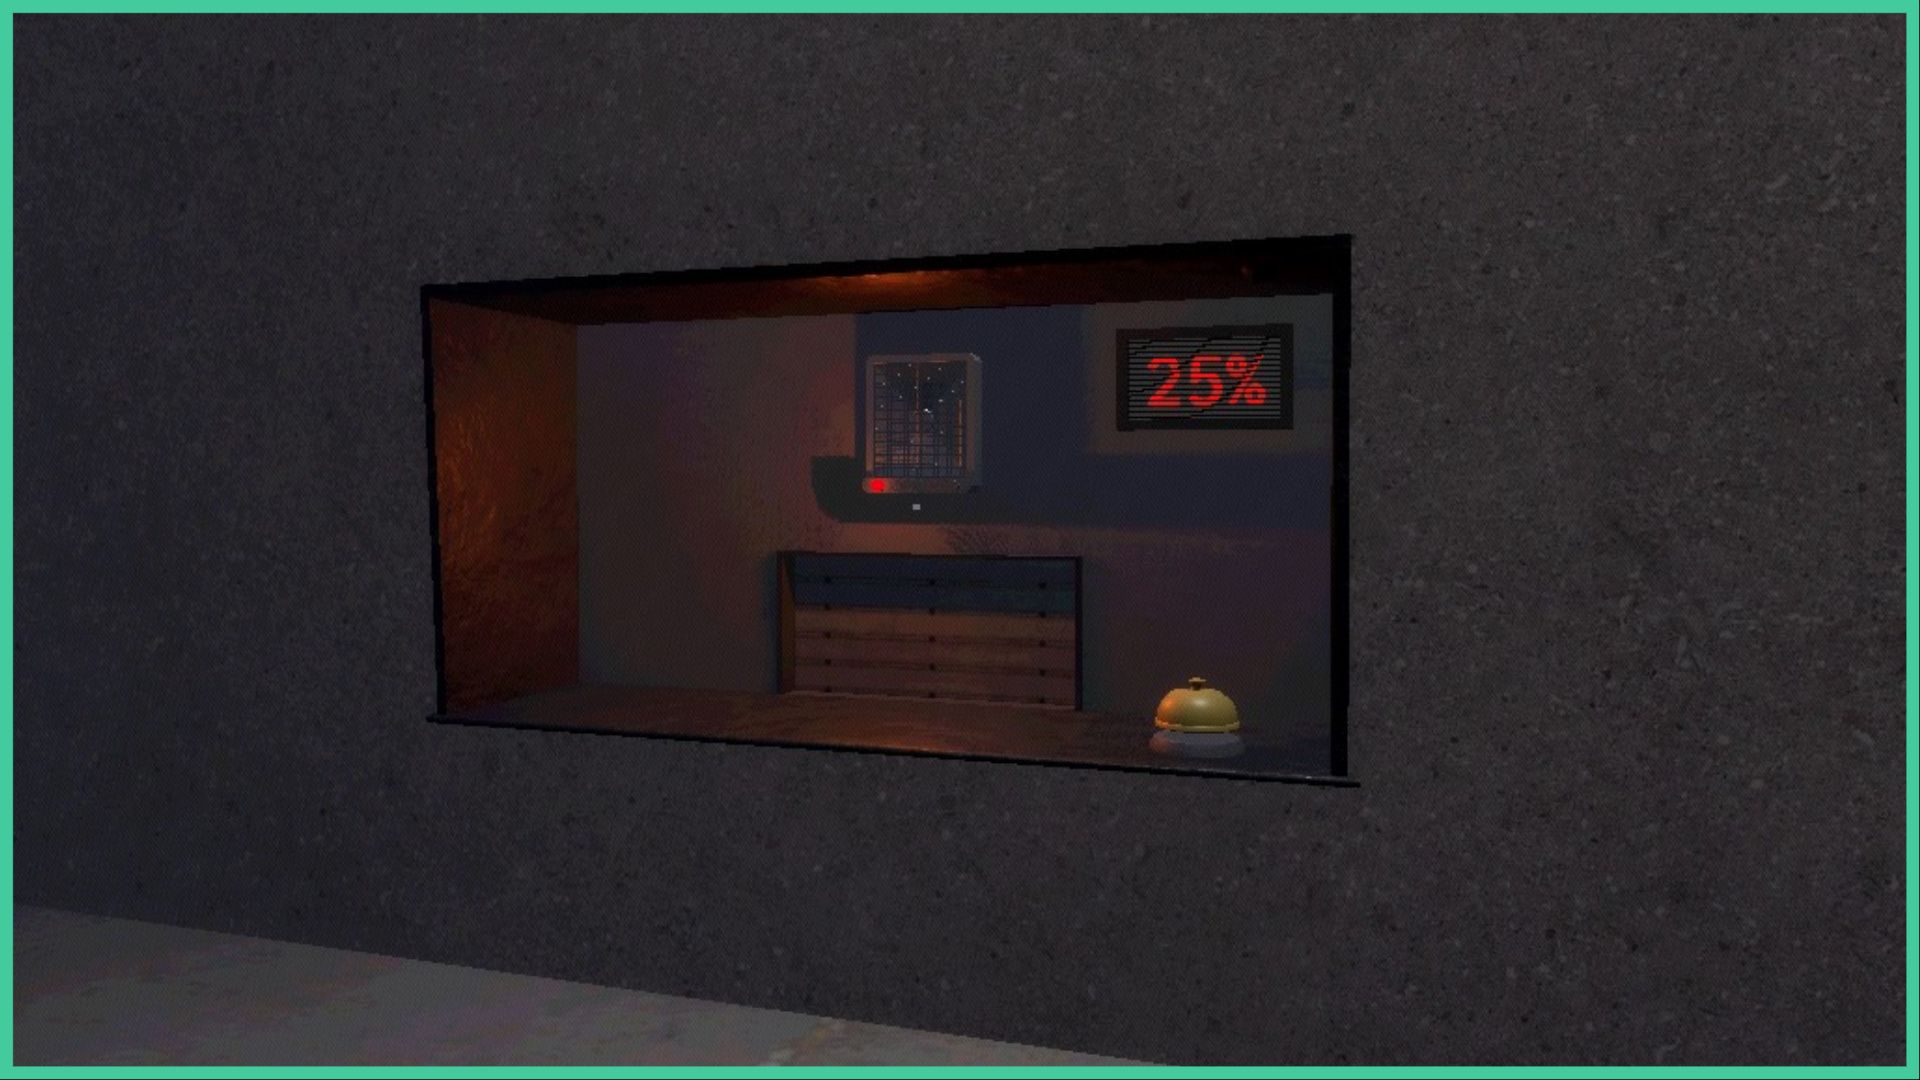 feature image for our how to sell in deadly company guide, the image features a screenshot from the game of the counter at the company building where you can sell your scrap items, there is a bell to ring, as well as a little hatch and a screen that has "25%" on it